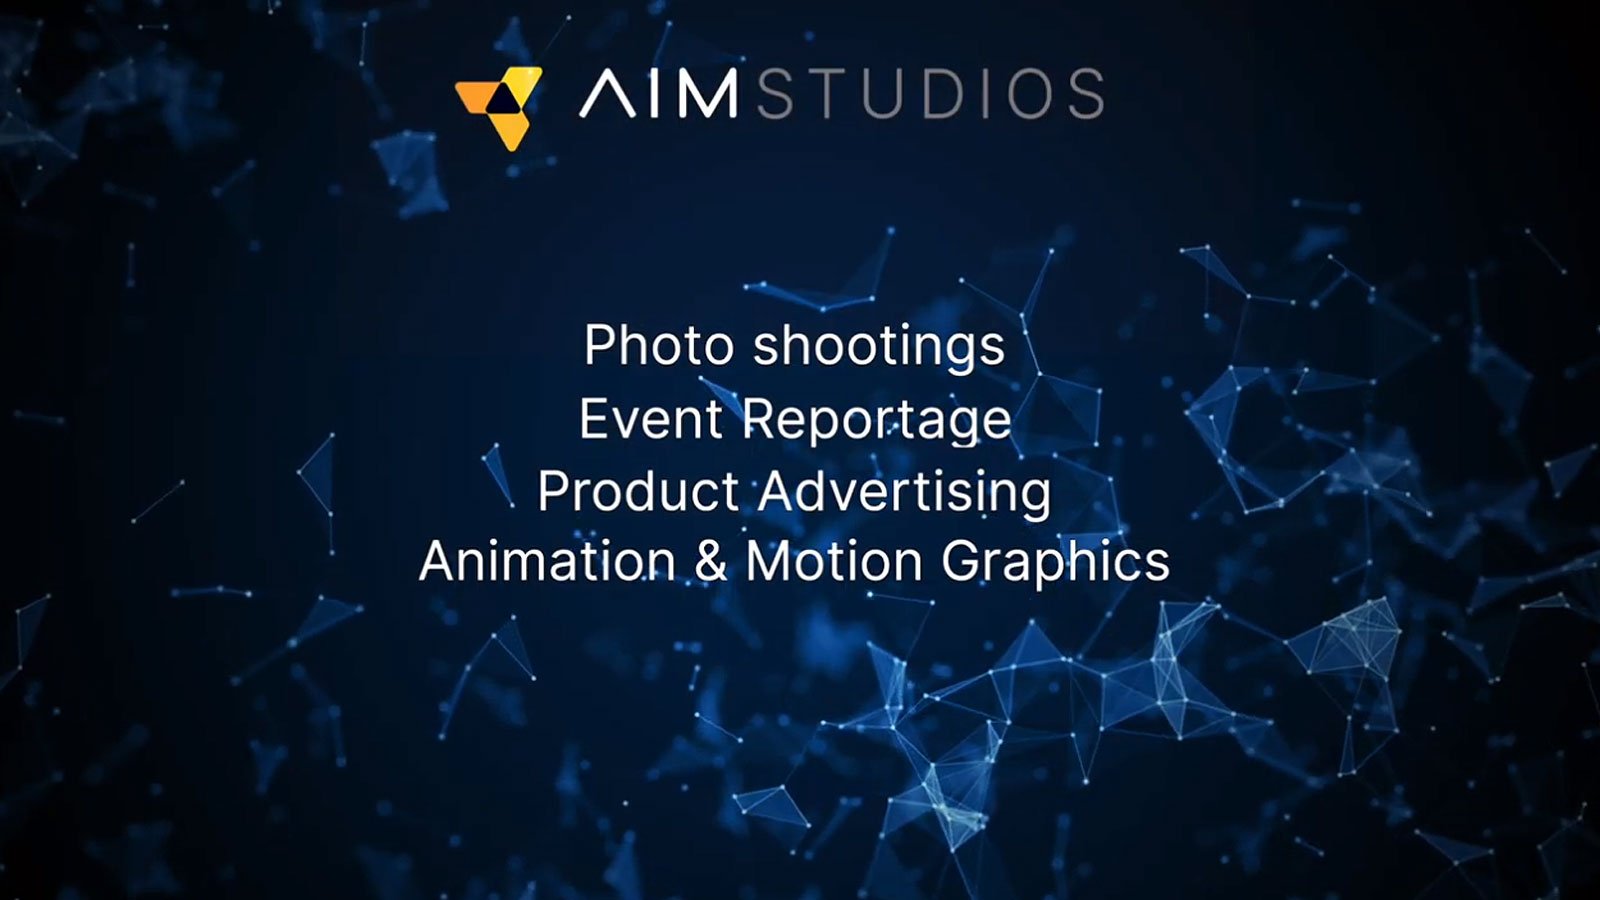 AIM Group presents AIM Studios, the new business unit dedicated to video marketing.